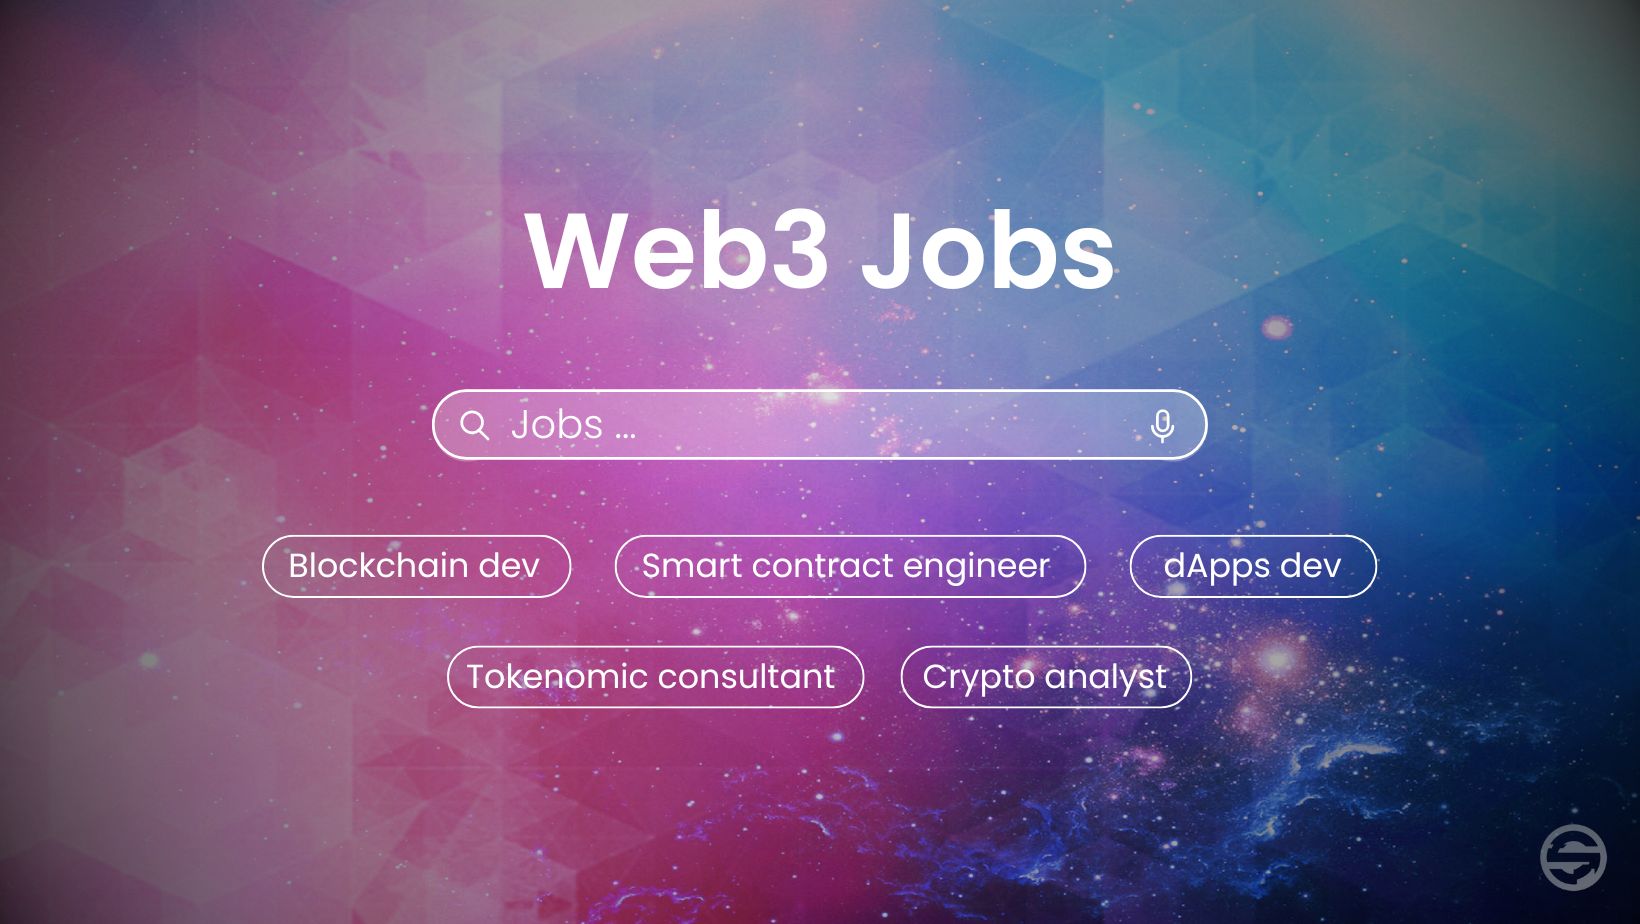 Web3: a new frontier in digital careers